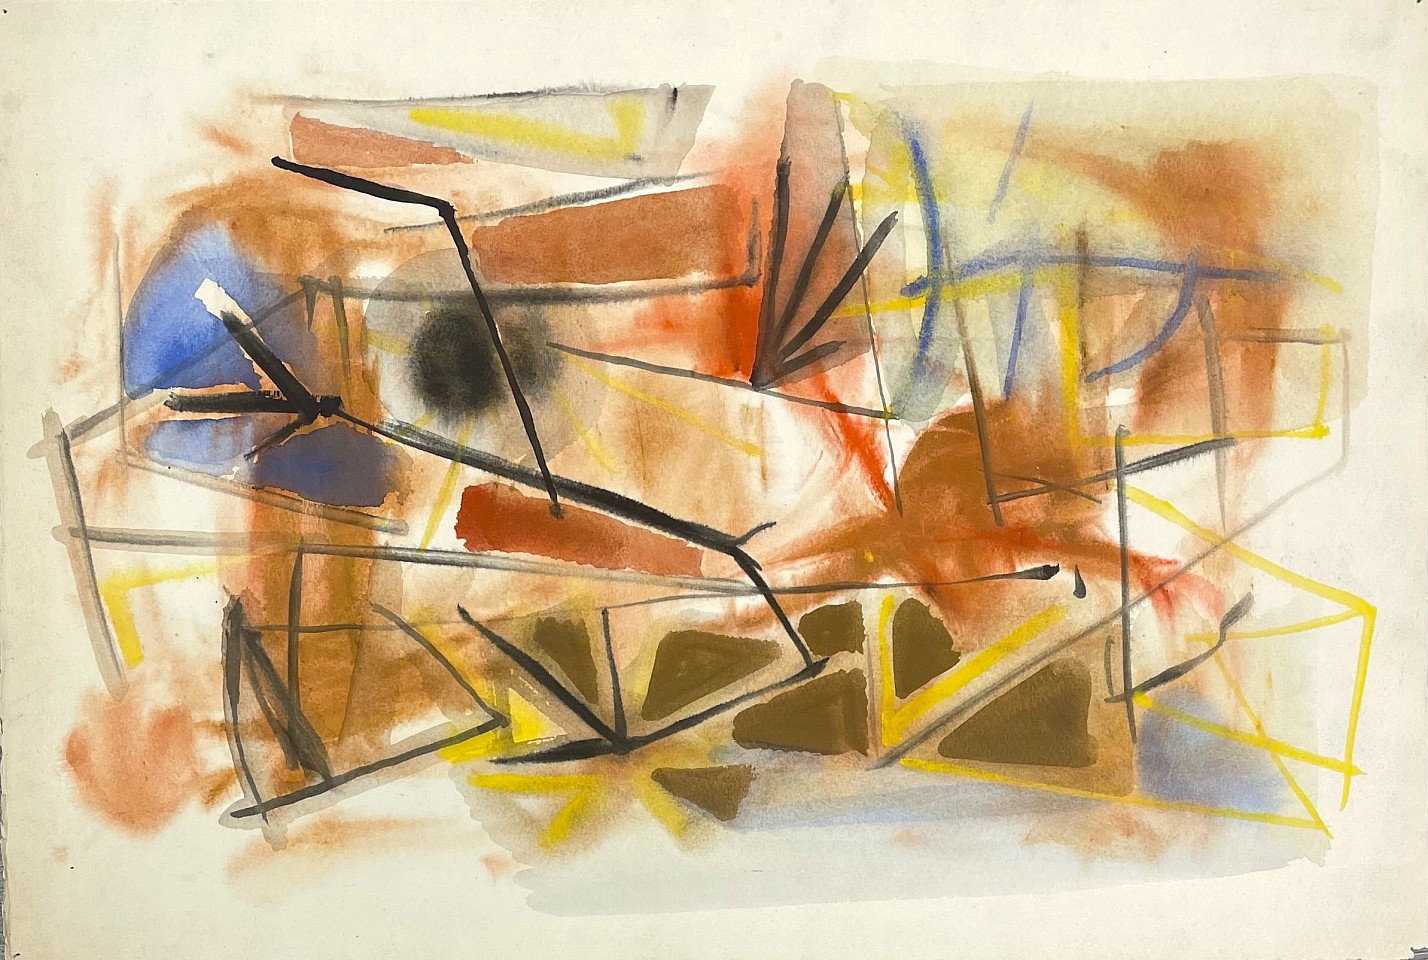 Fred  Mitchell, Untitled, c. 1947
Pastel on paper, 15 1/2 x 22 1/2 in.
MIT008
&bull;